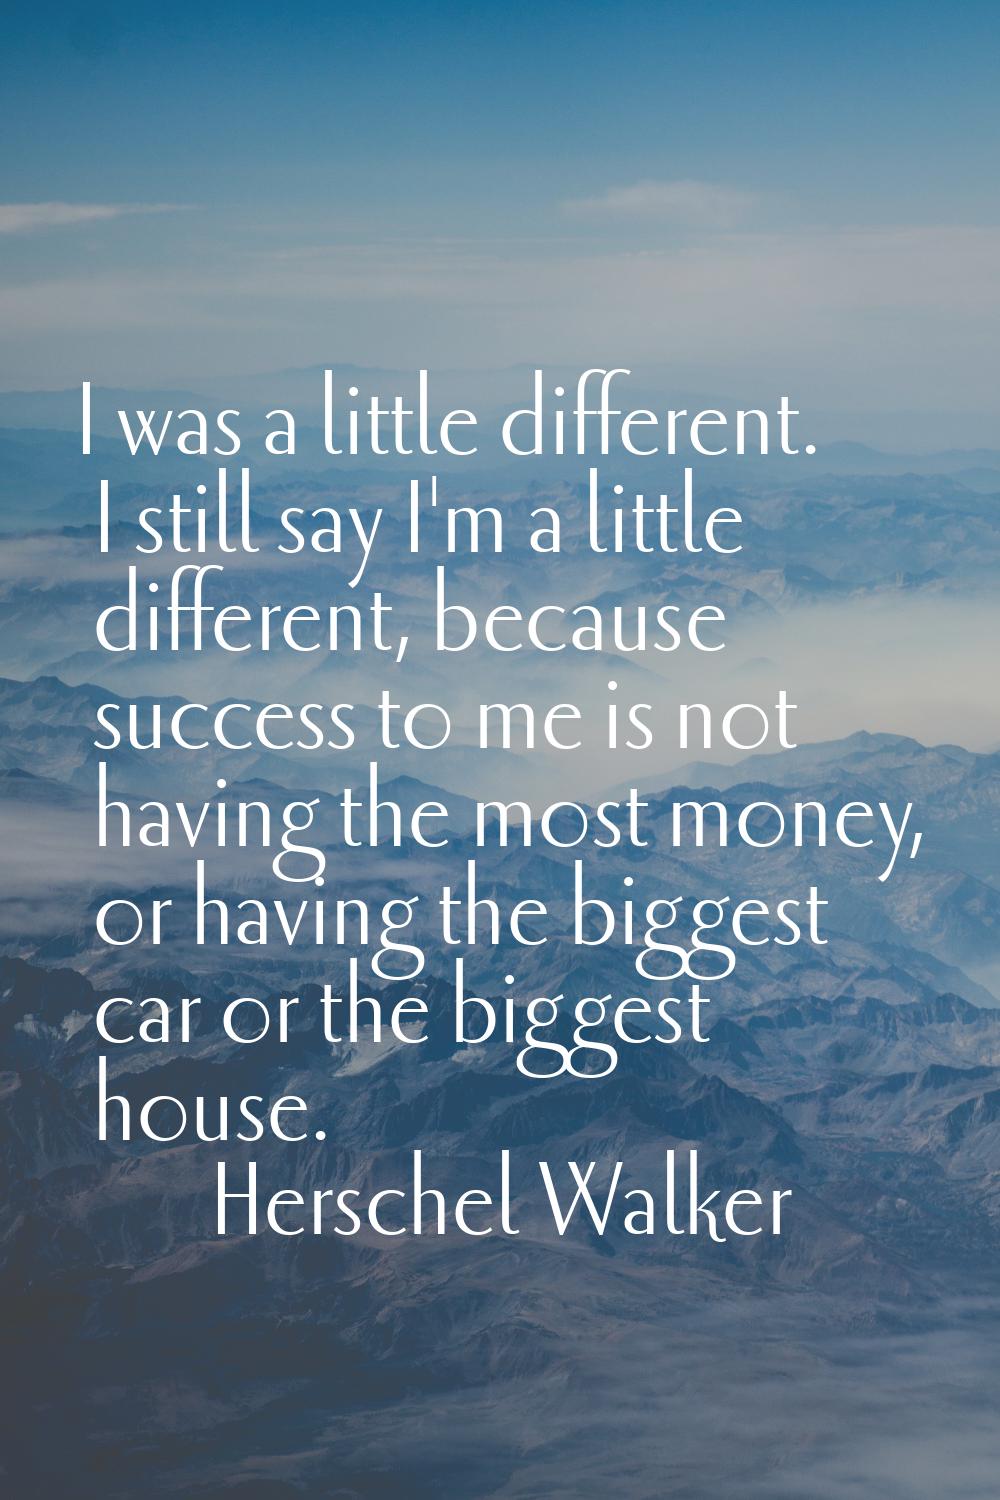 I was a little different. I still say I'm a little different, because success to me is not having t